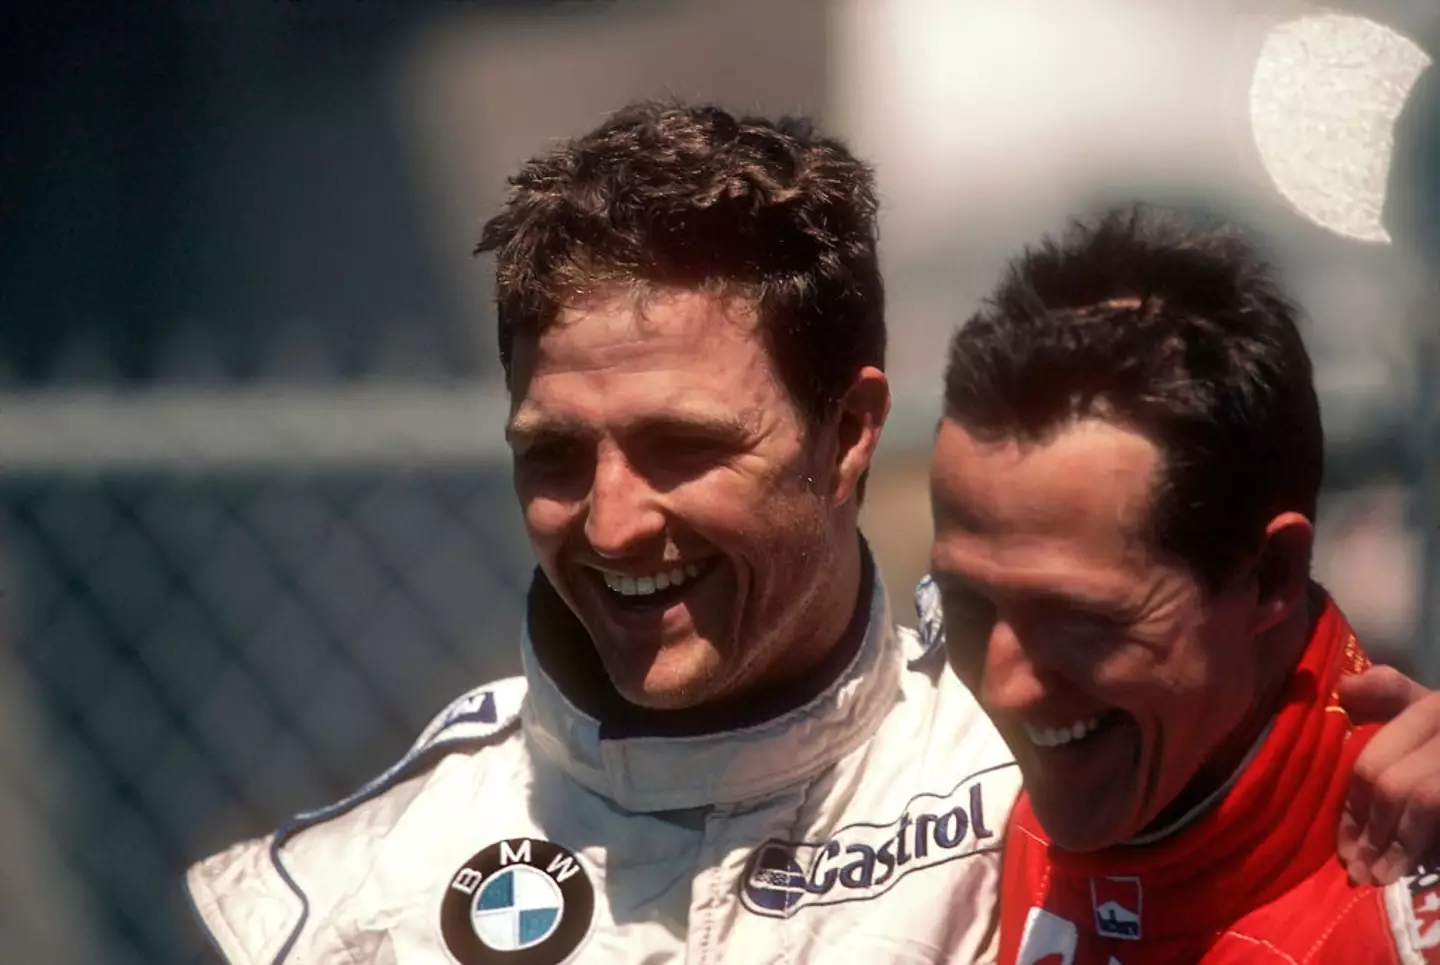 Ralf and Michael Schumacher are the only siblings to have both won an F1 race.